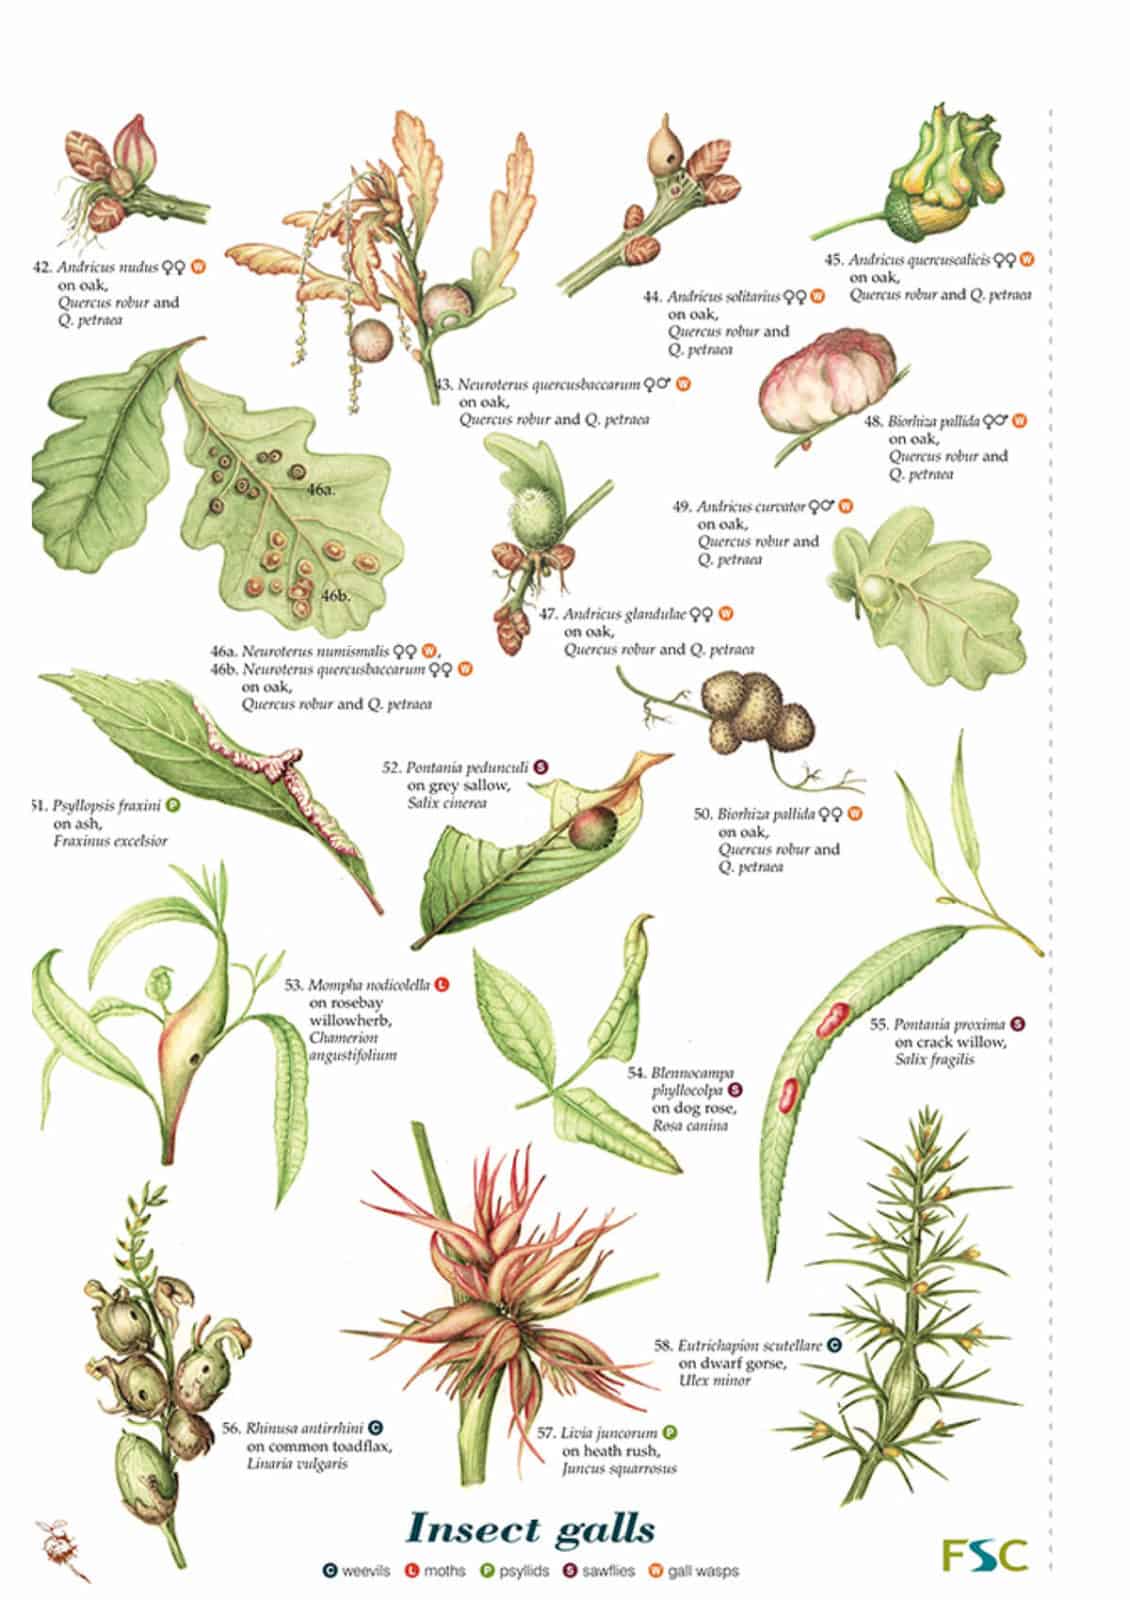 Plant galls guide